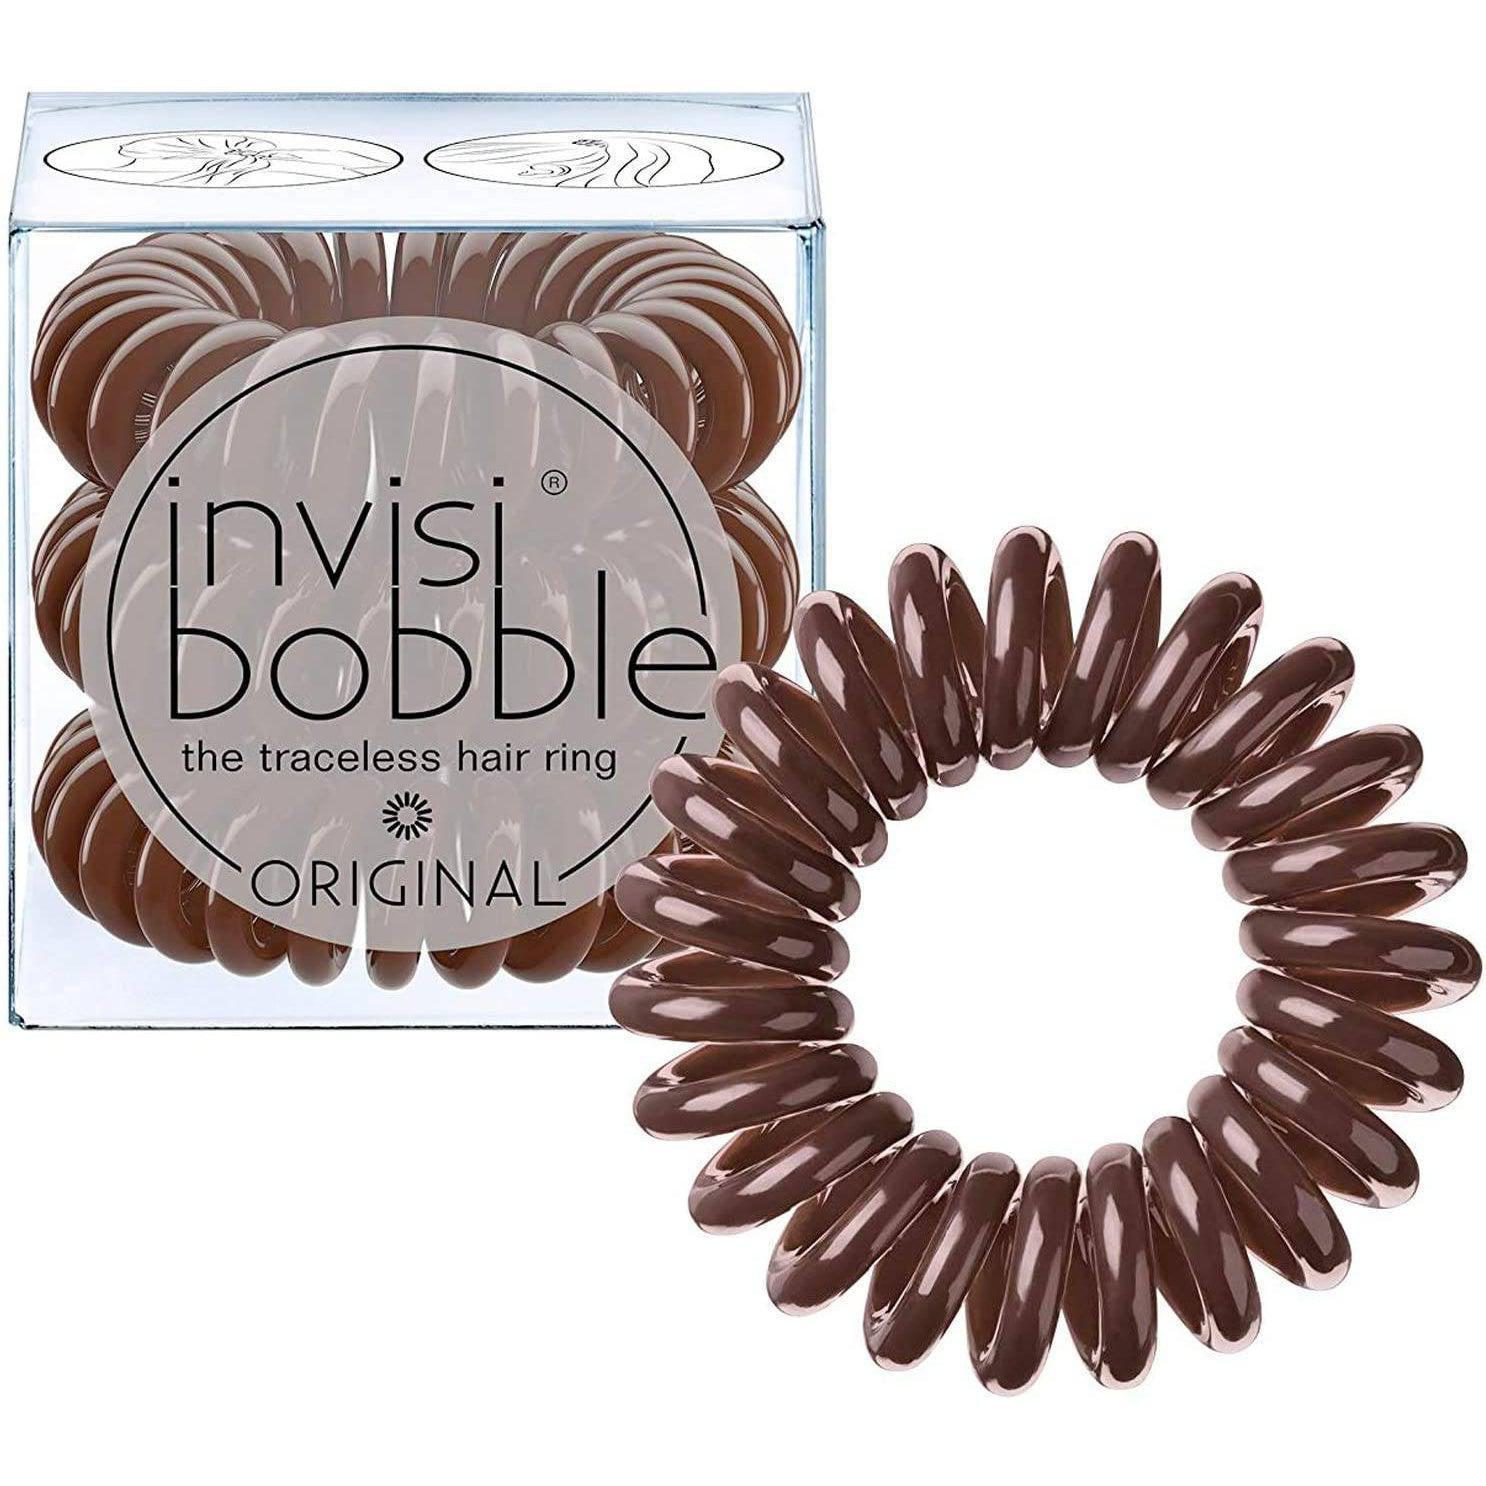 invisibobble ORIGINAL Hair Ties, Pretzel Brown, 3 Pack - Traceless, Strong Hold, Waterproof - Suitable for All Hair Types - Healthxpress.ie